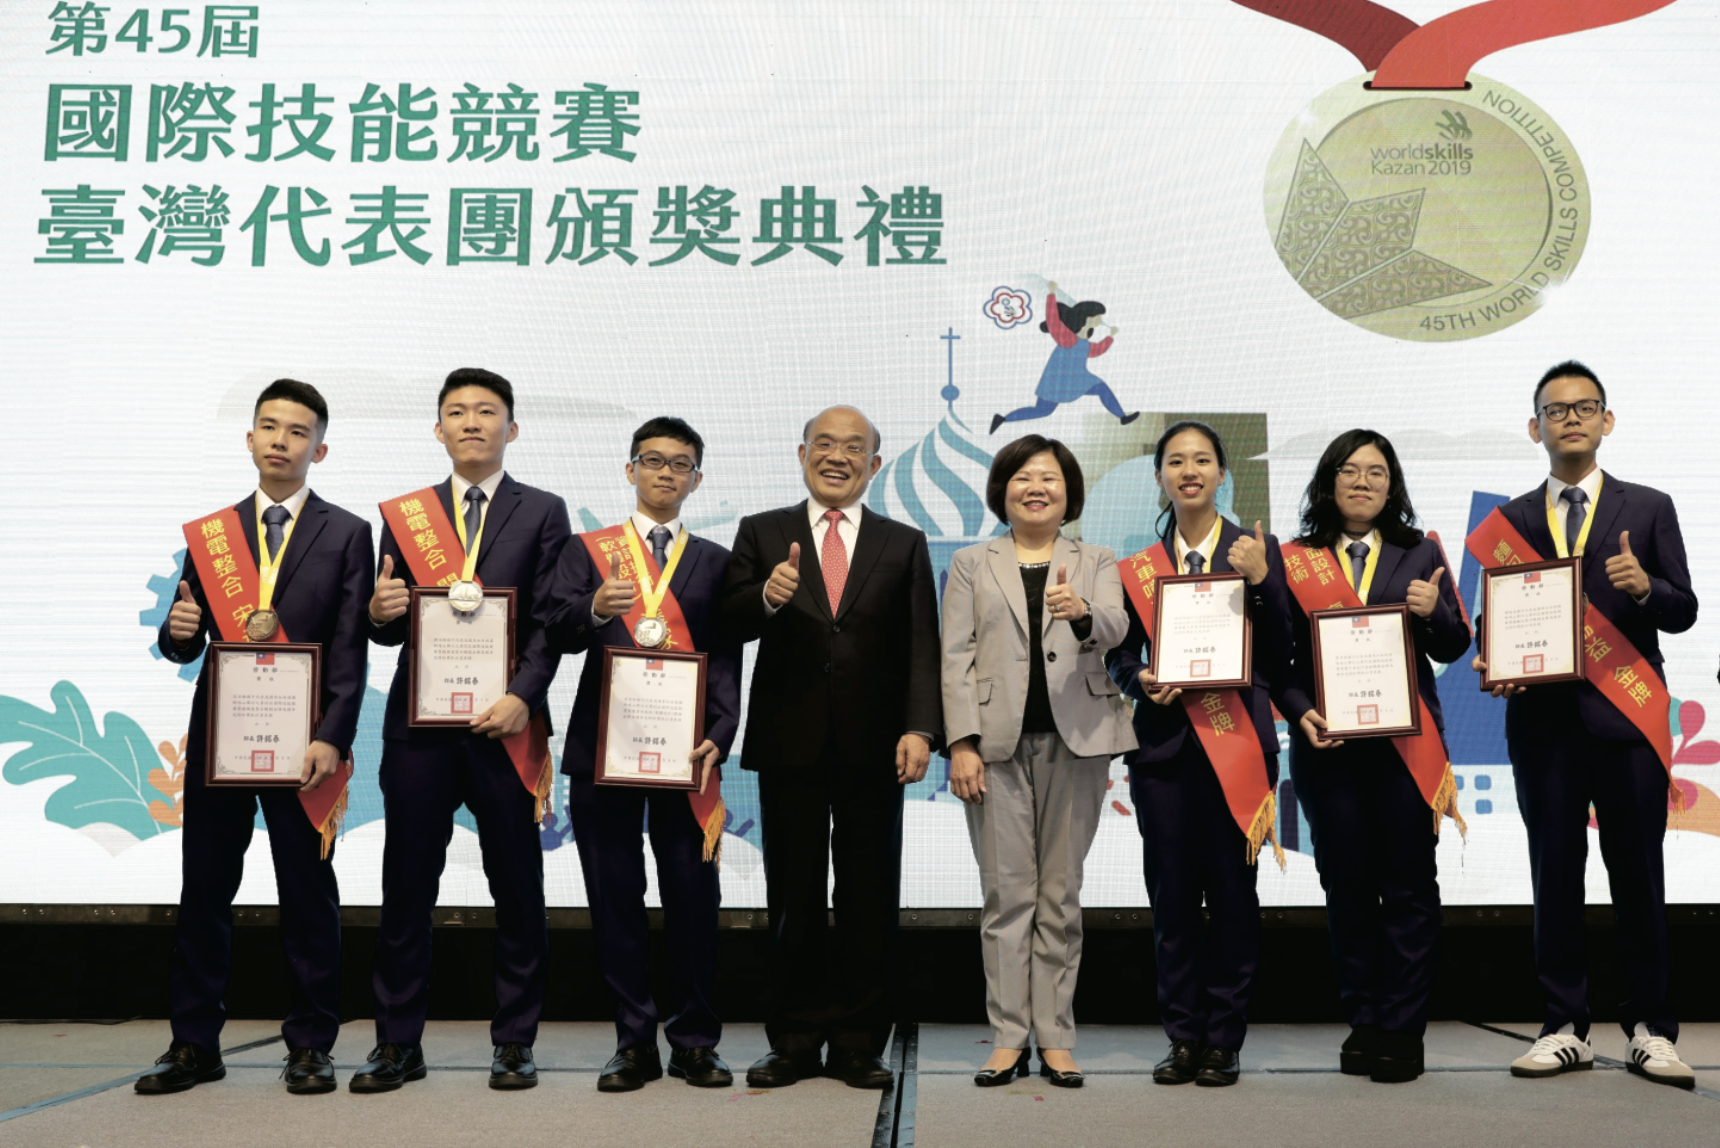 Taiwan delegation to the 45th WorldSkills Competitions returns triumphant, Executive Yuan Premier Su Tseng-chang personally presents them with awards to recognize competition glory